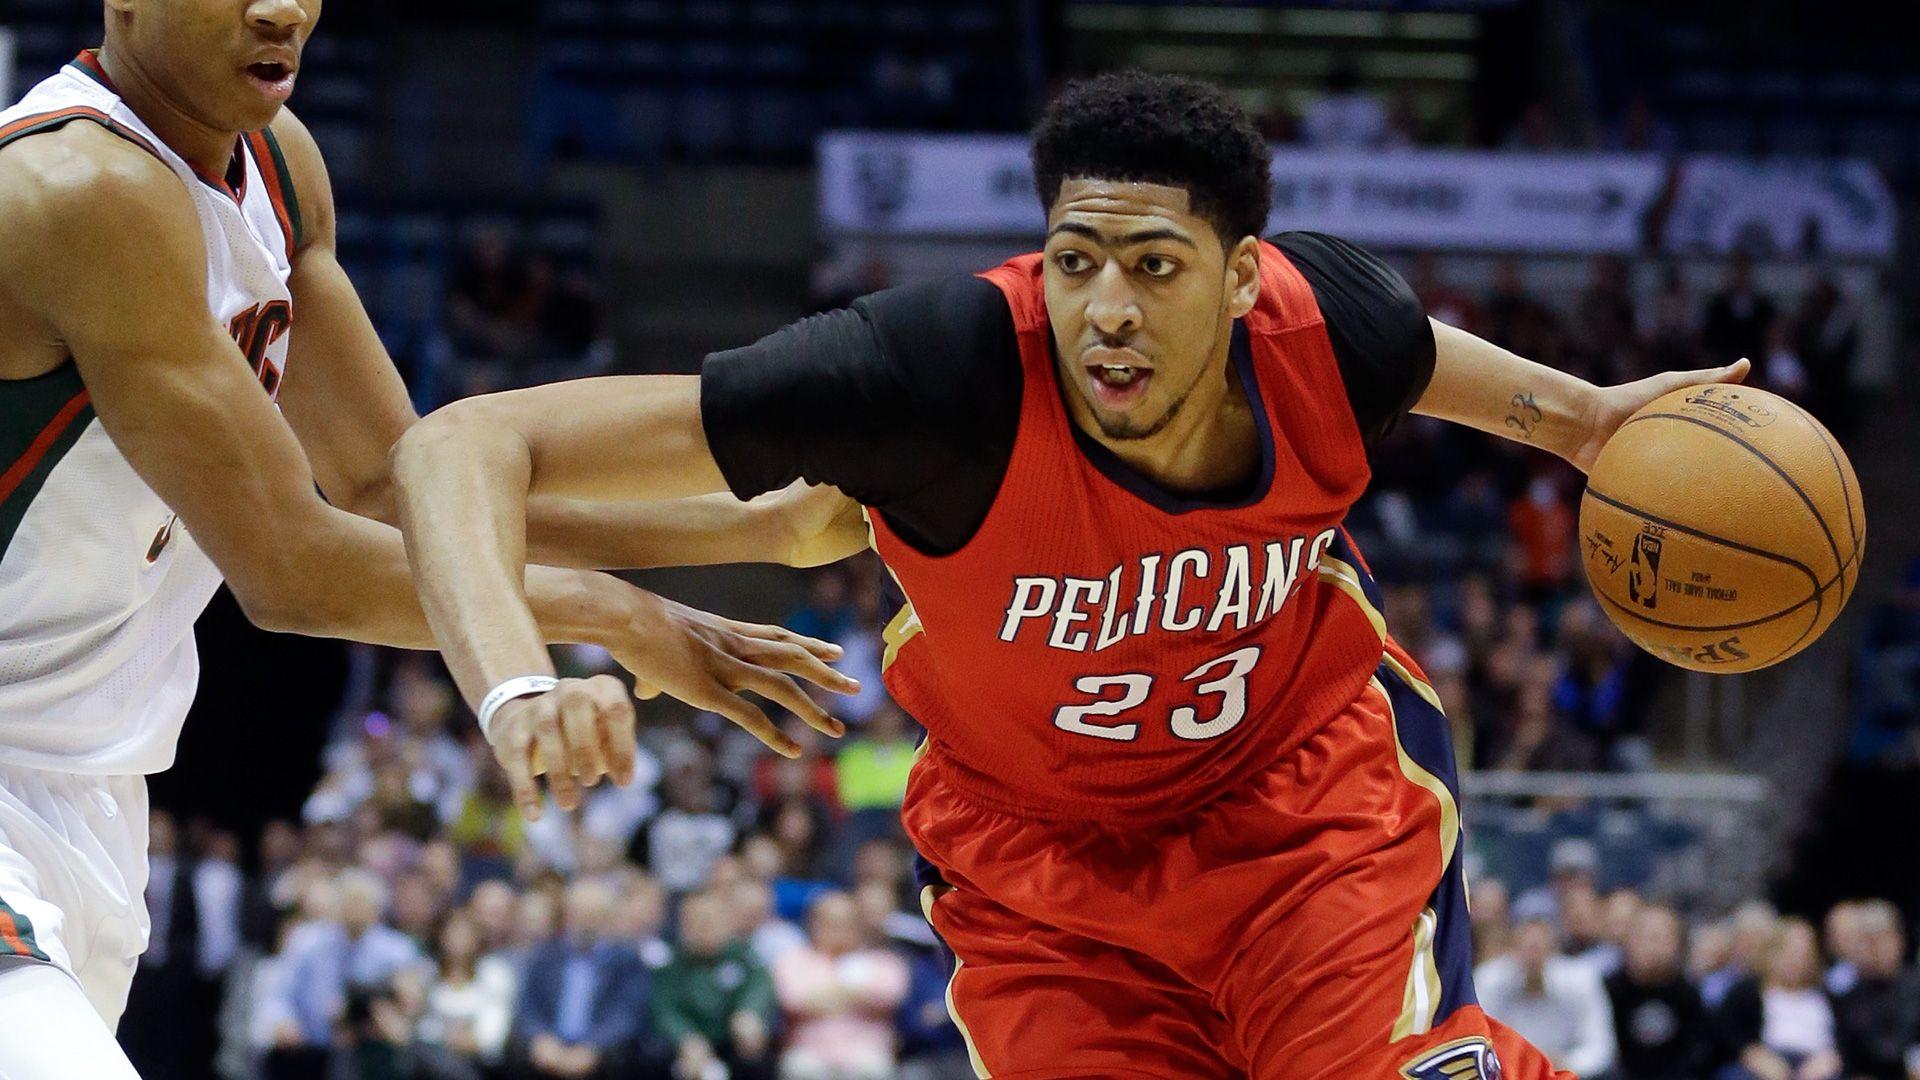 Anthony Davis and the Supporting Cast of the New Orleans Pelicans